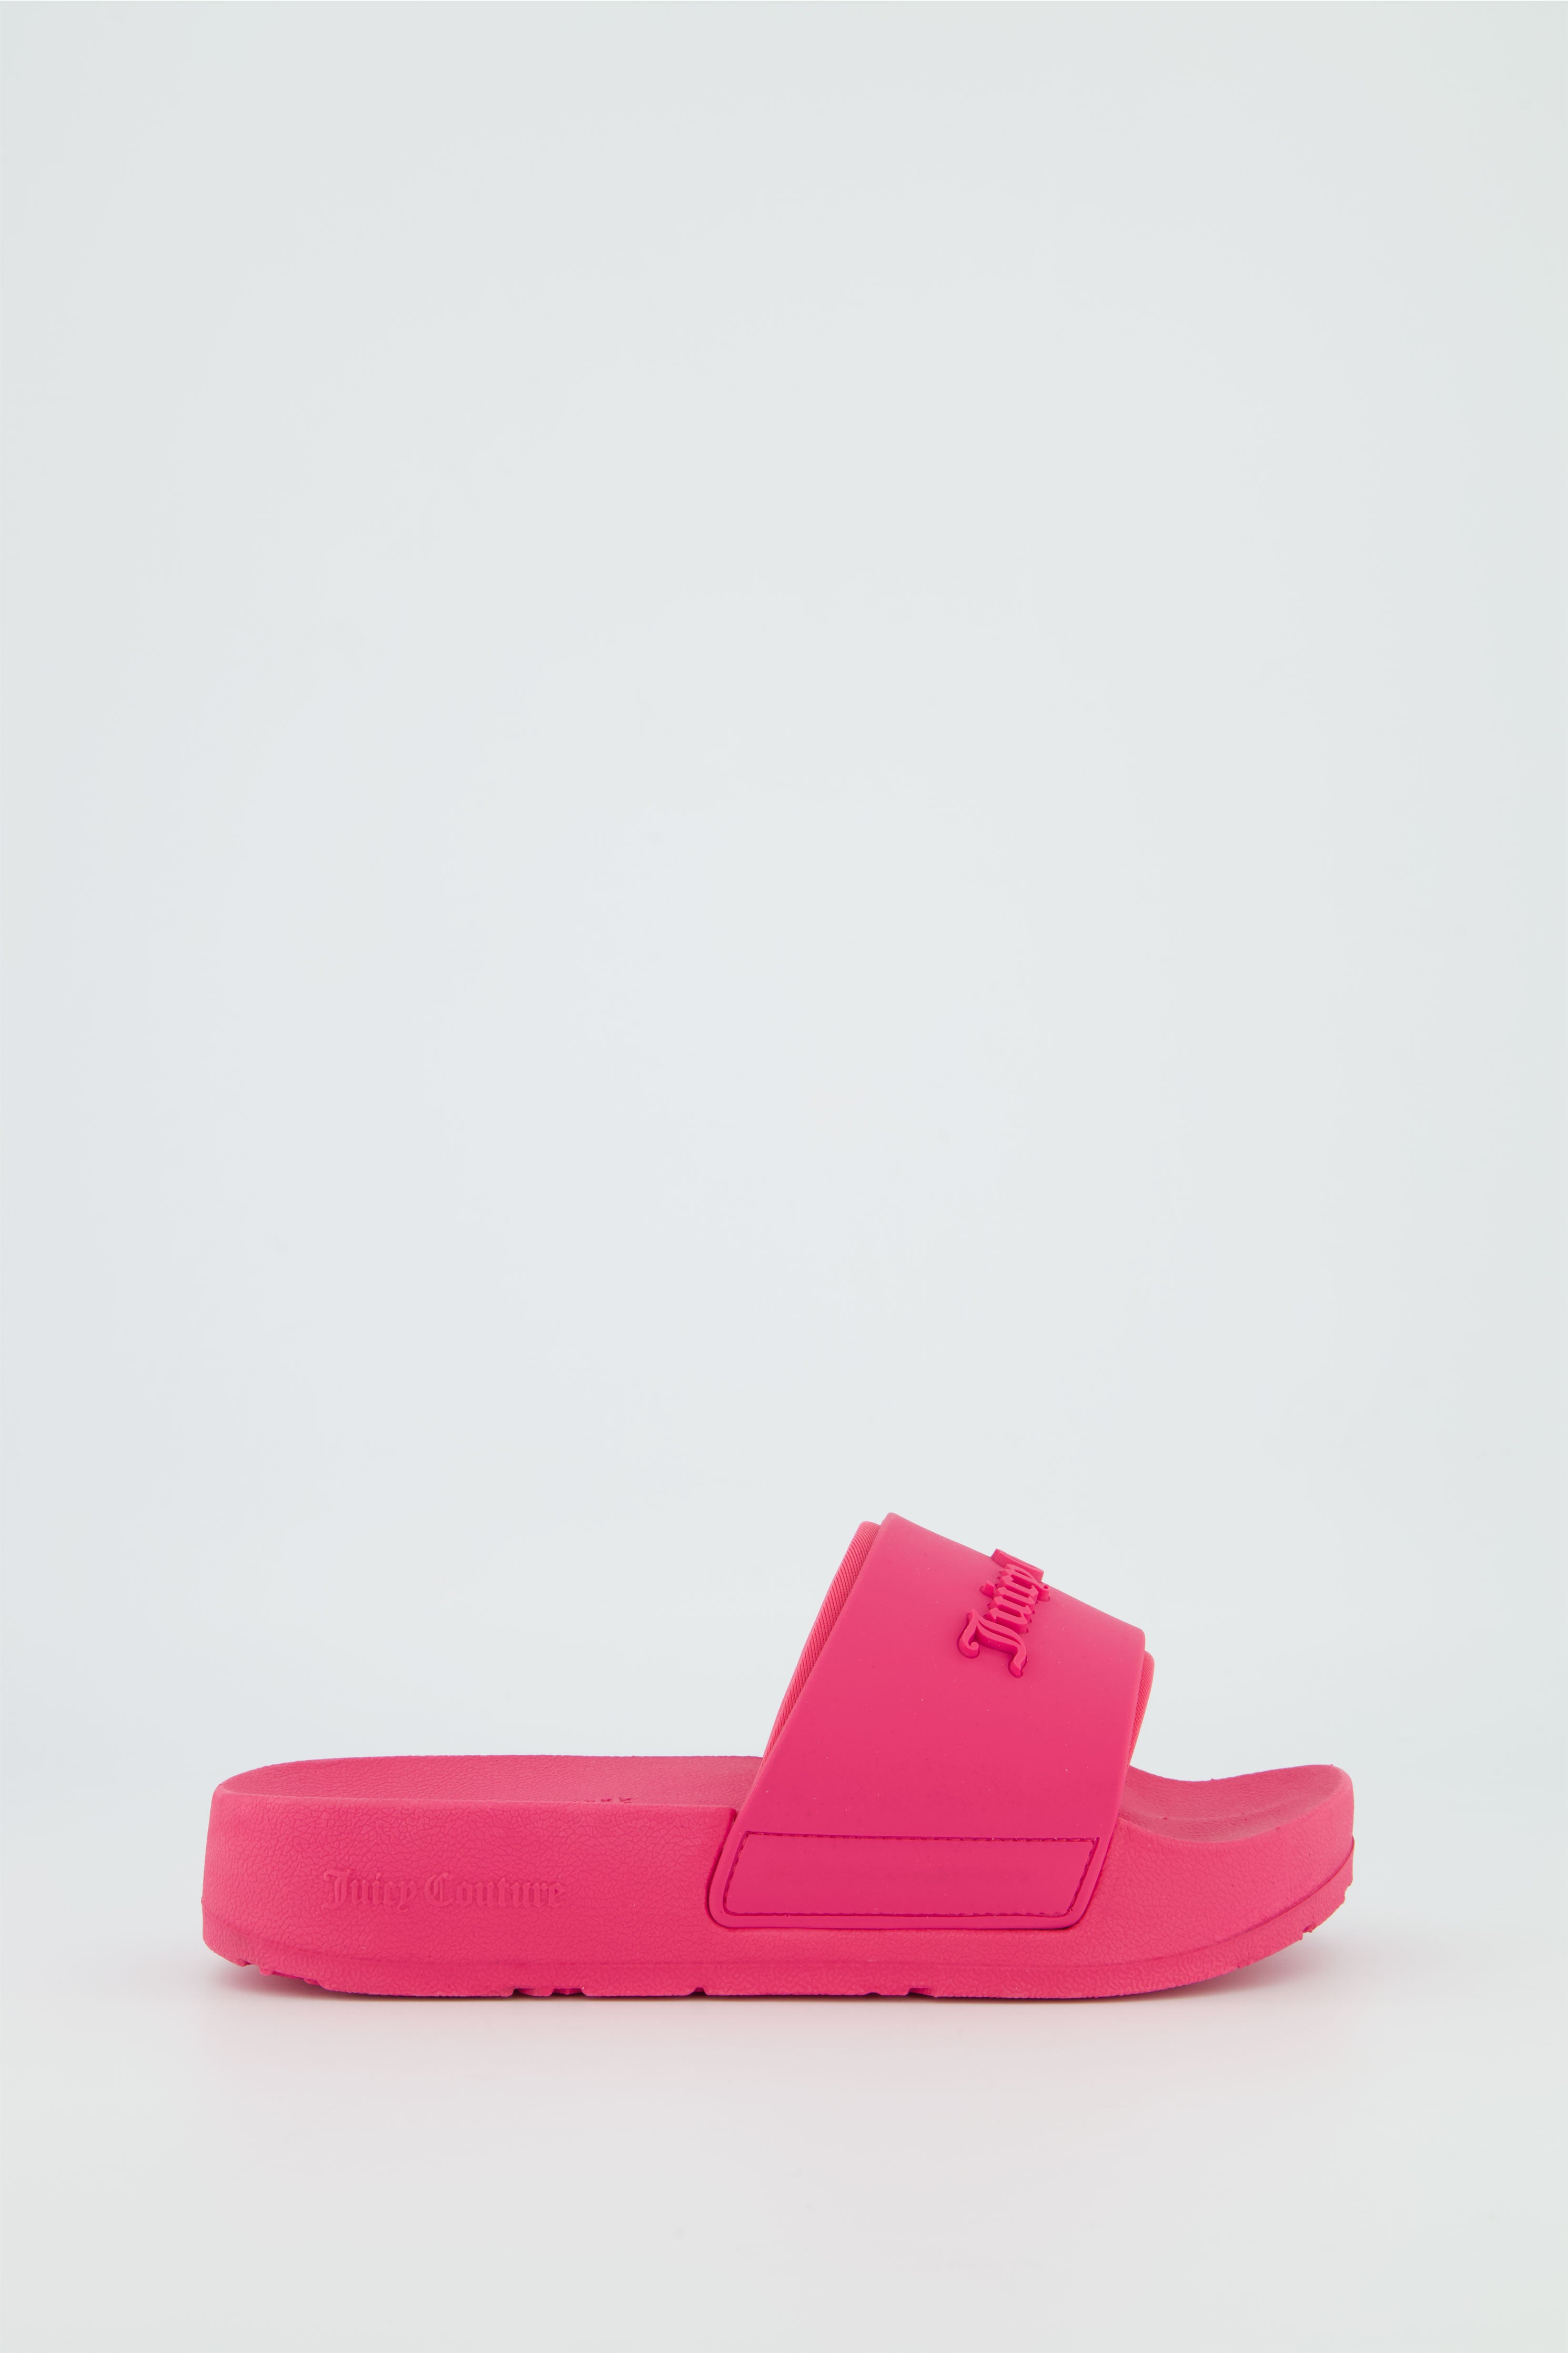 Women's Juicy Couture Pink Glo Stacked Sliders